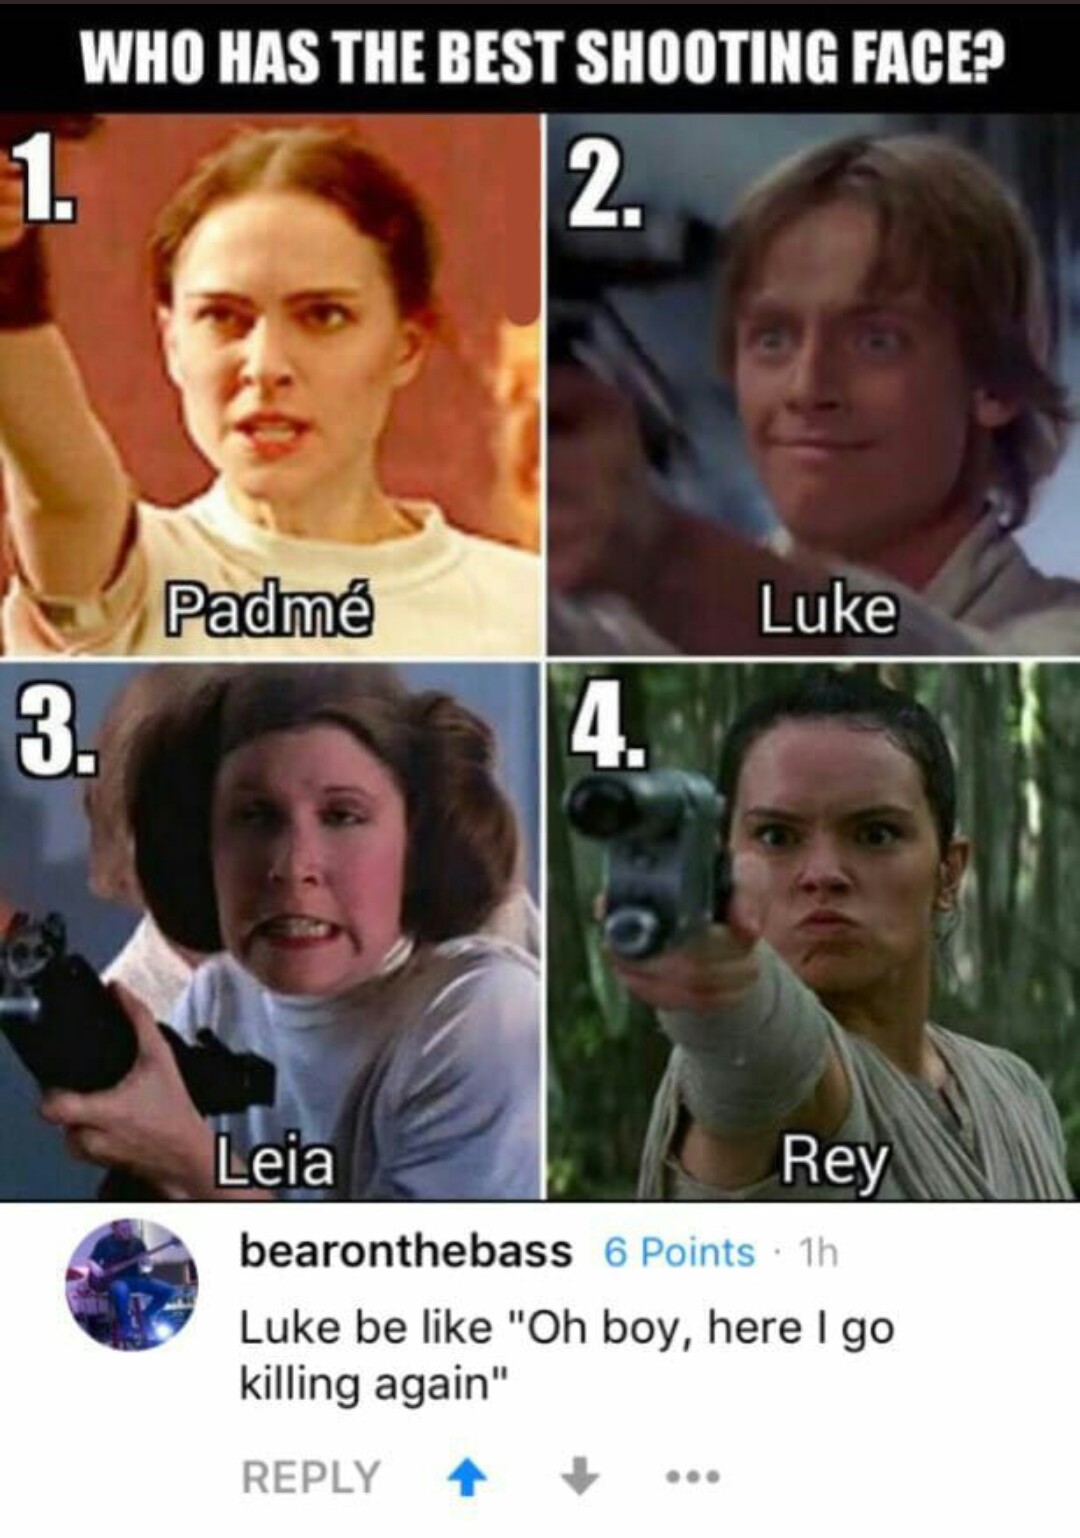 star wars shooting face meme - Who Has The Best Shooting Face? Padm Luke Leia Rey bearonthebass 6 Points 1h Luke be "Oh boy, here I go killing again" ...